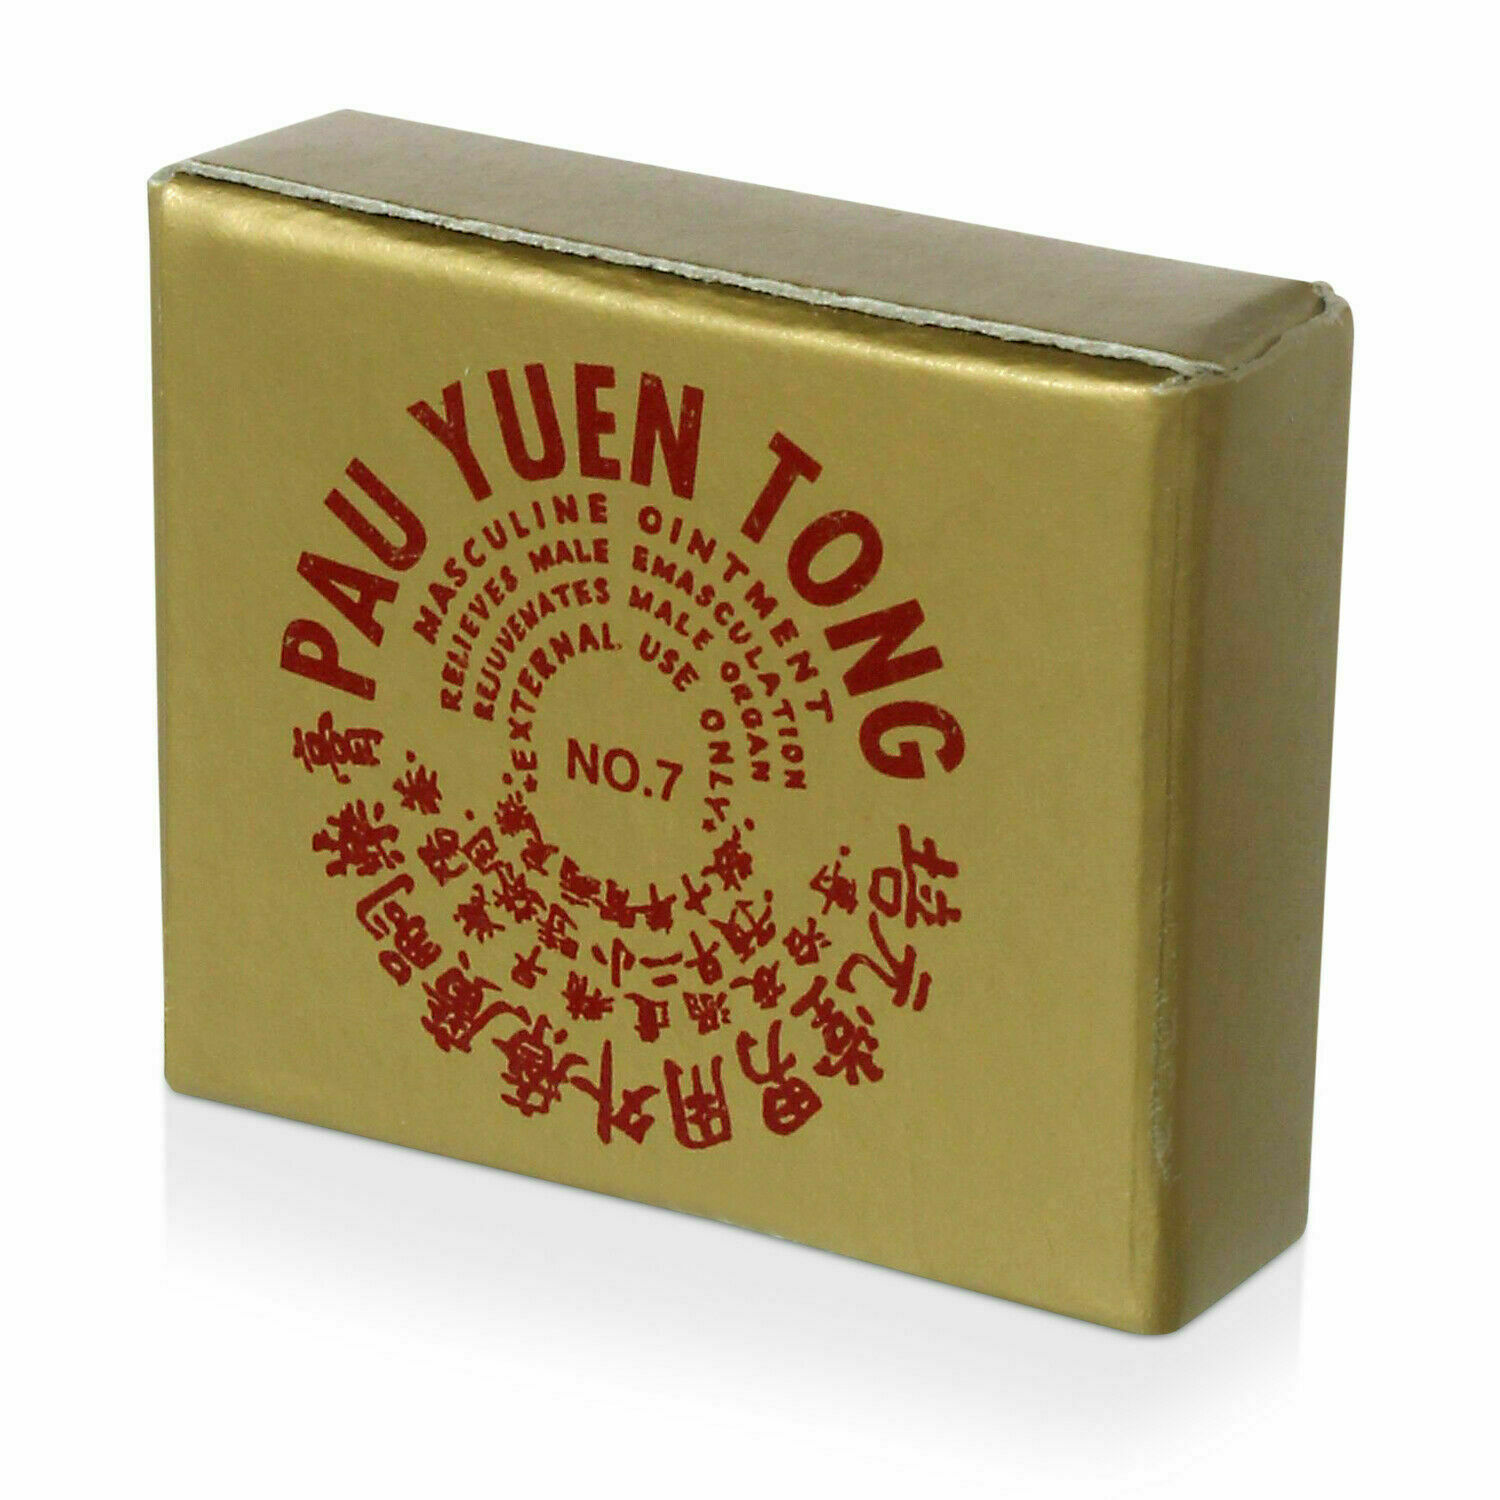 Pau Yuen Tong Old Chinese Balm Delay Plus Control, Authentic, 